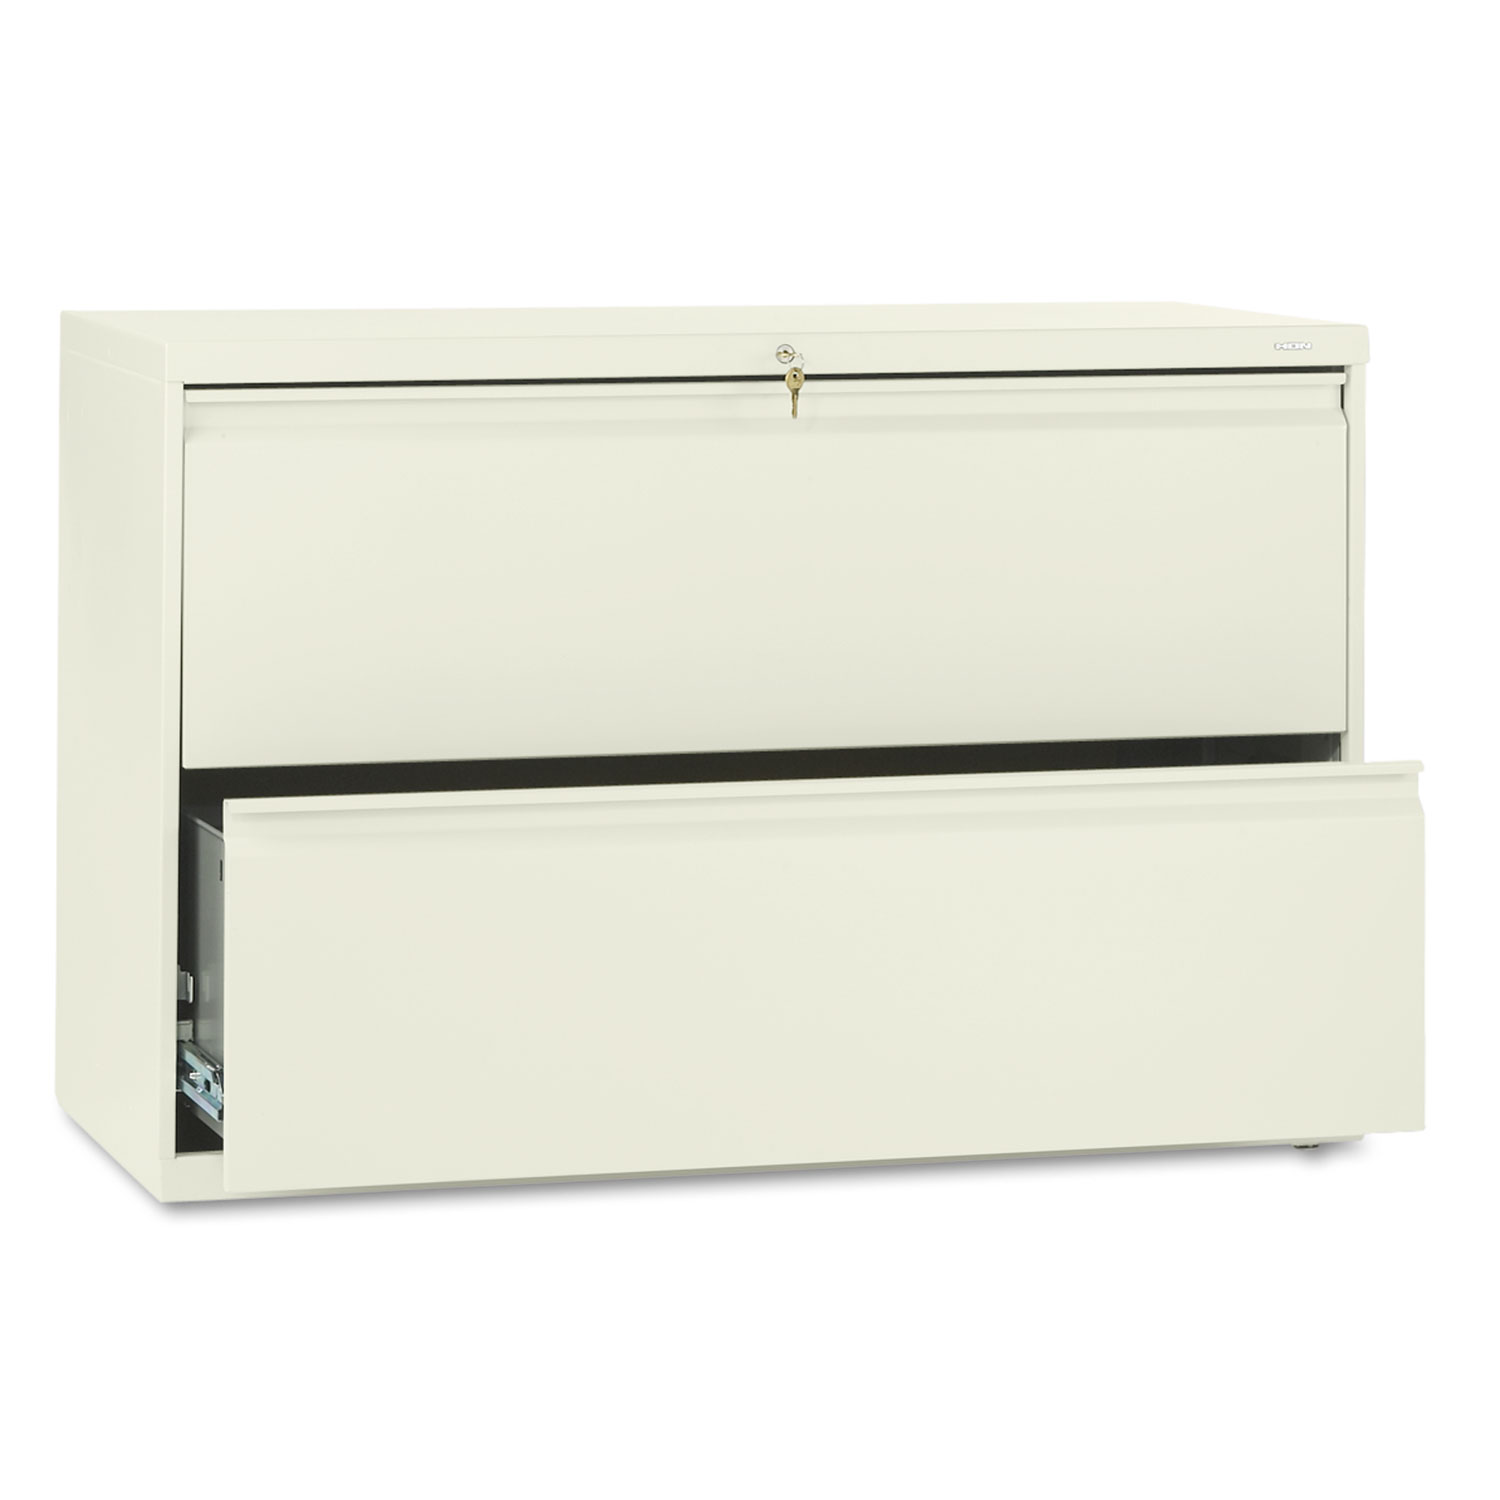 800 Series Two-Drawer Lateral File, 42w x 19-1/4d x 28-3/8h, Putty